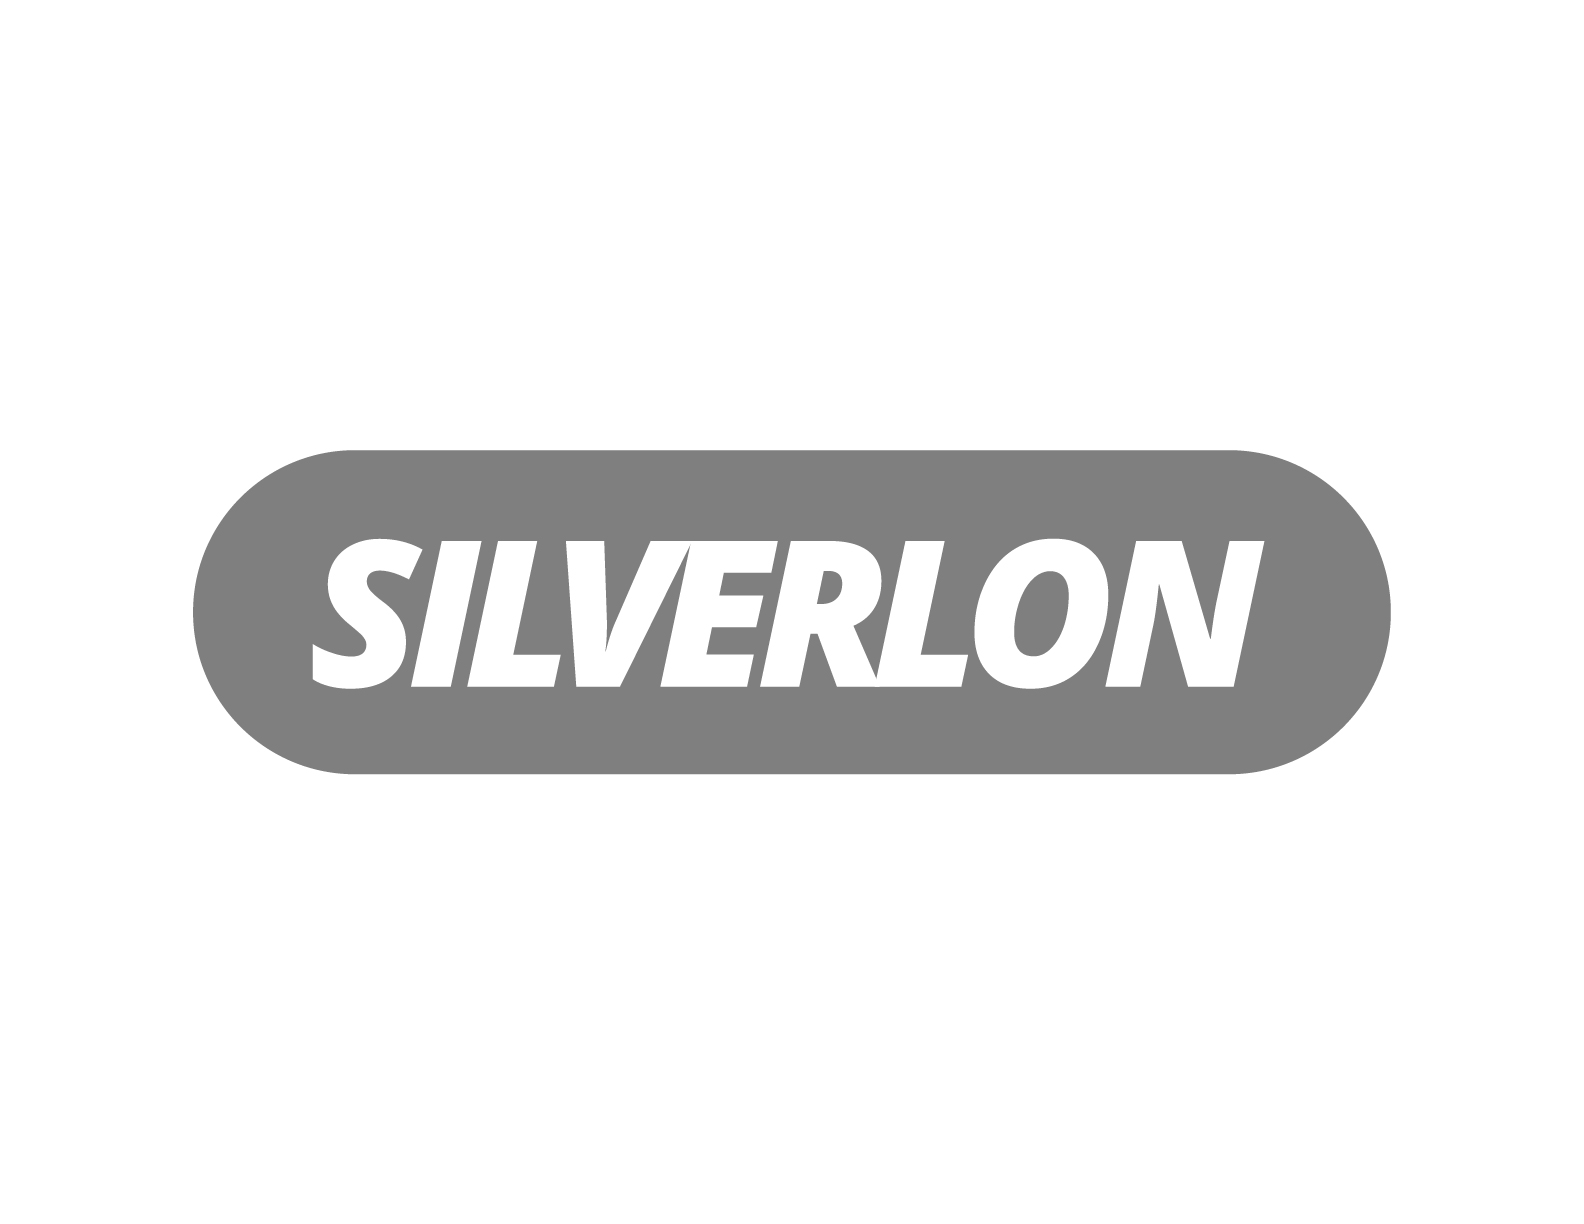 Silverlon was originally developed for the U.S. military, where it is still extensively used for management of burn and blast injuries.